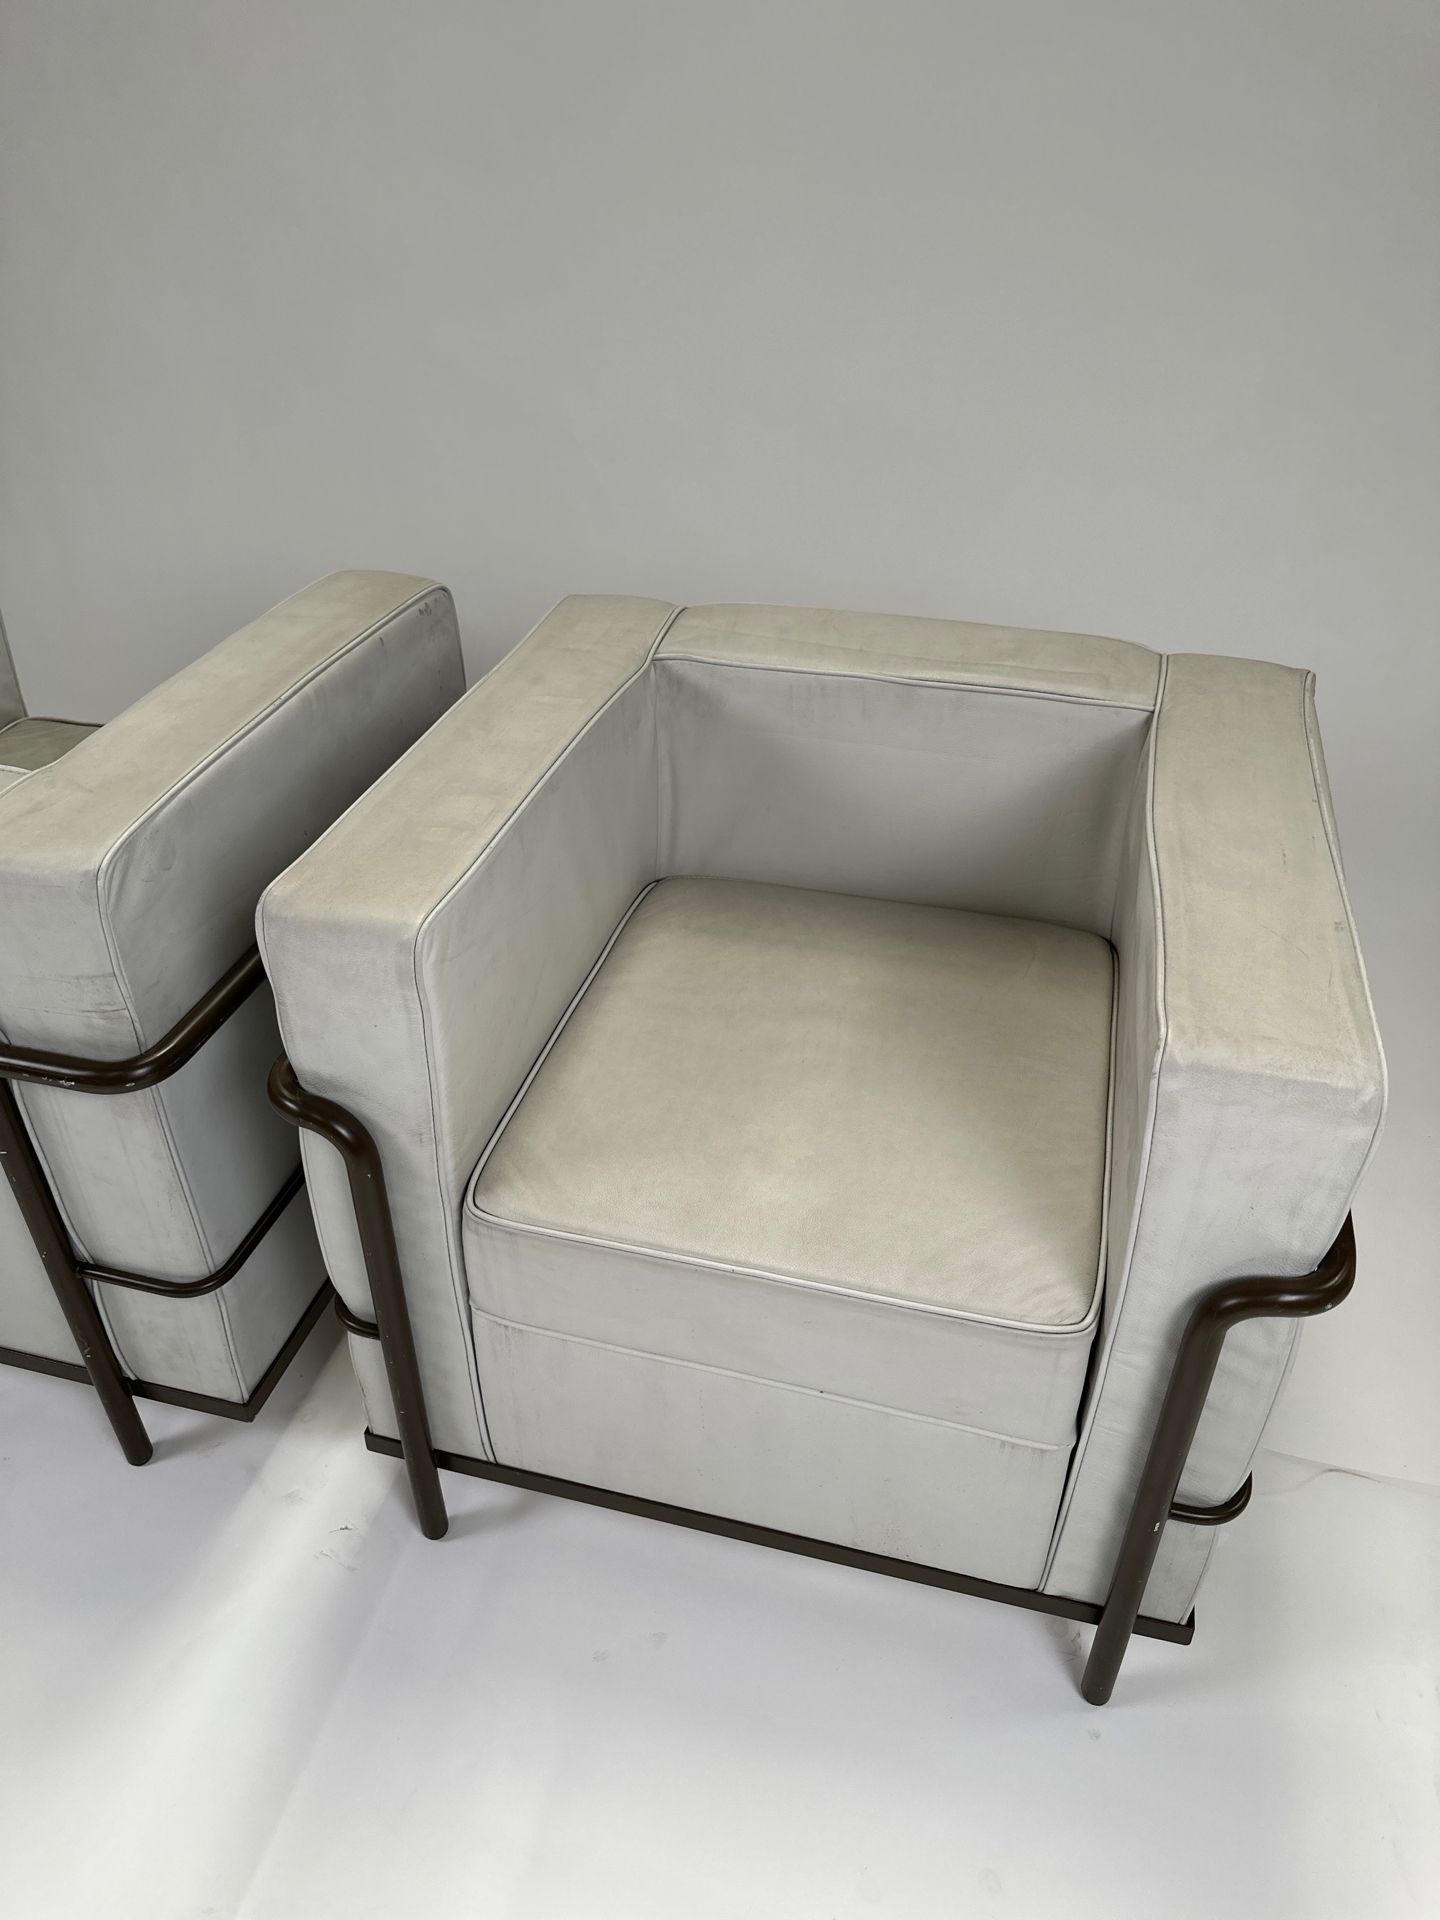 Pair of Le Corbusier, Cassina LC2 Style Leather Armchairs - Image 3 of 7